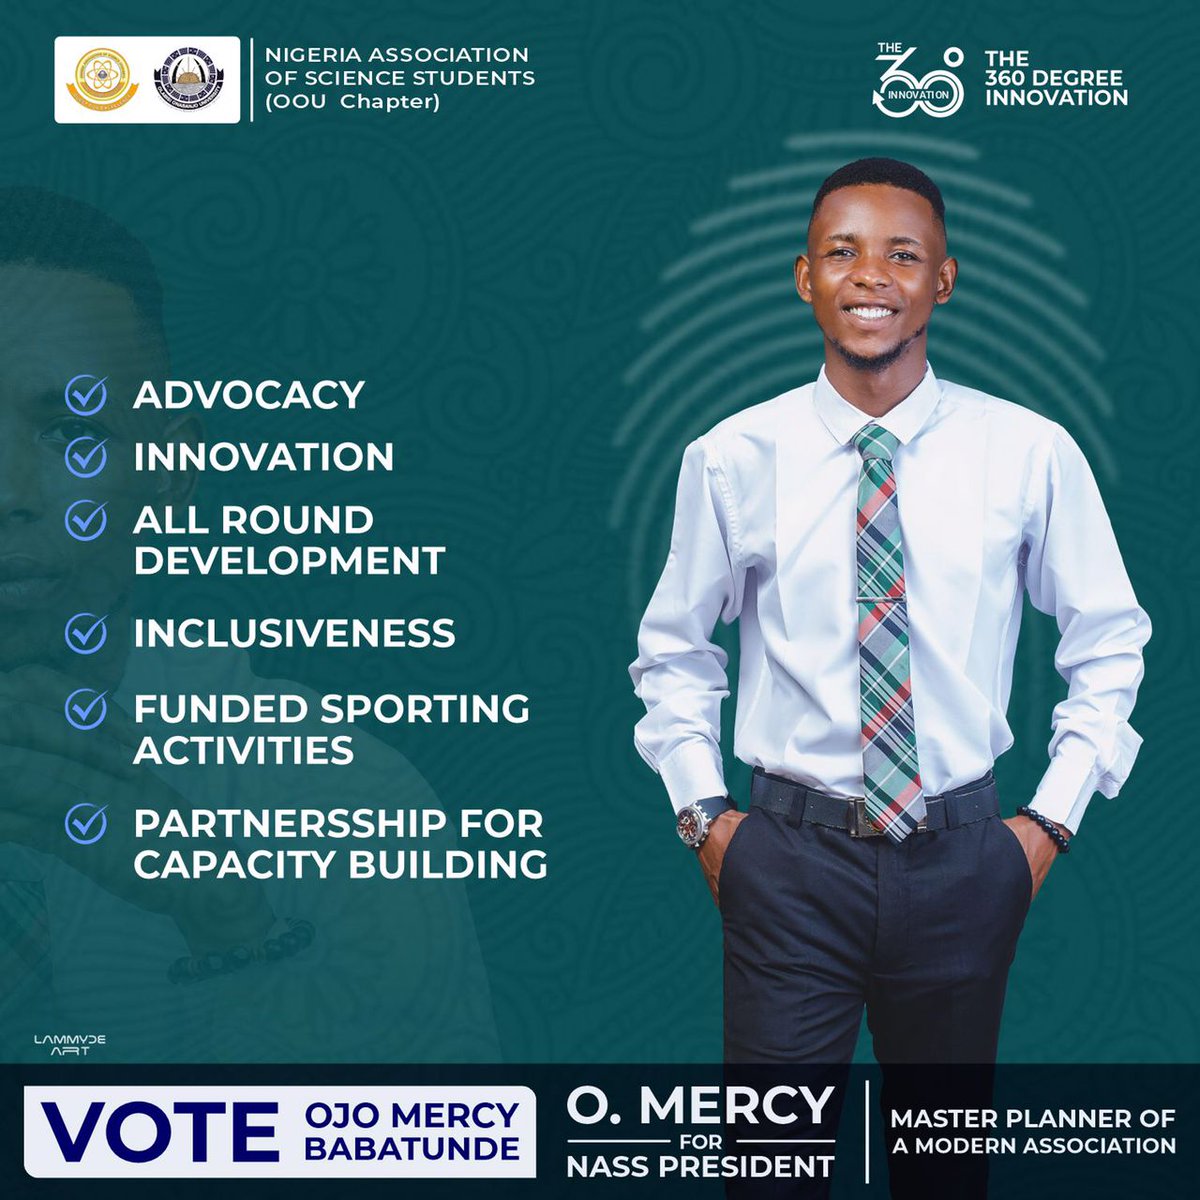 OJO MERCY WON WITH 778 votes

O. MERCY IS NOW THE ELECTED PRESIDENT FOR NASS OOU CHAPTER.
#onlyinoou #NassResult